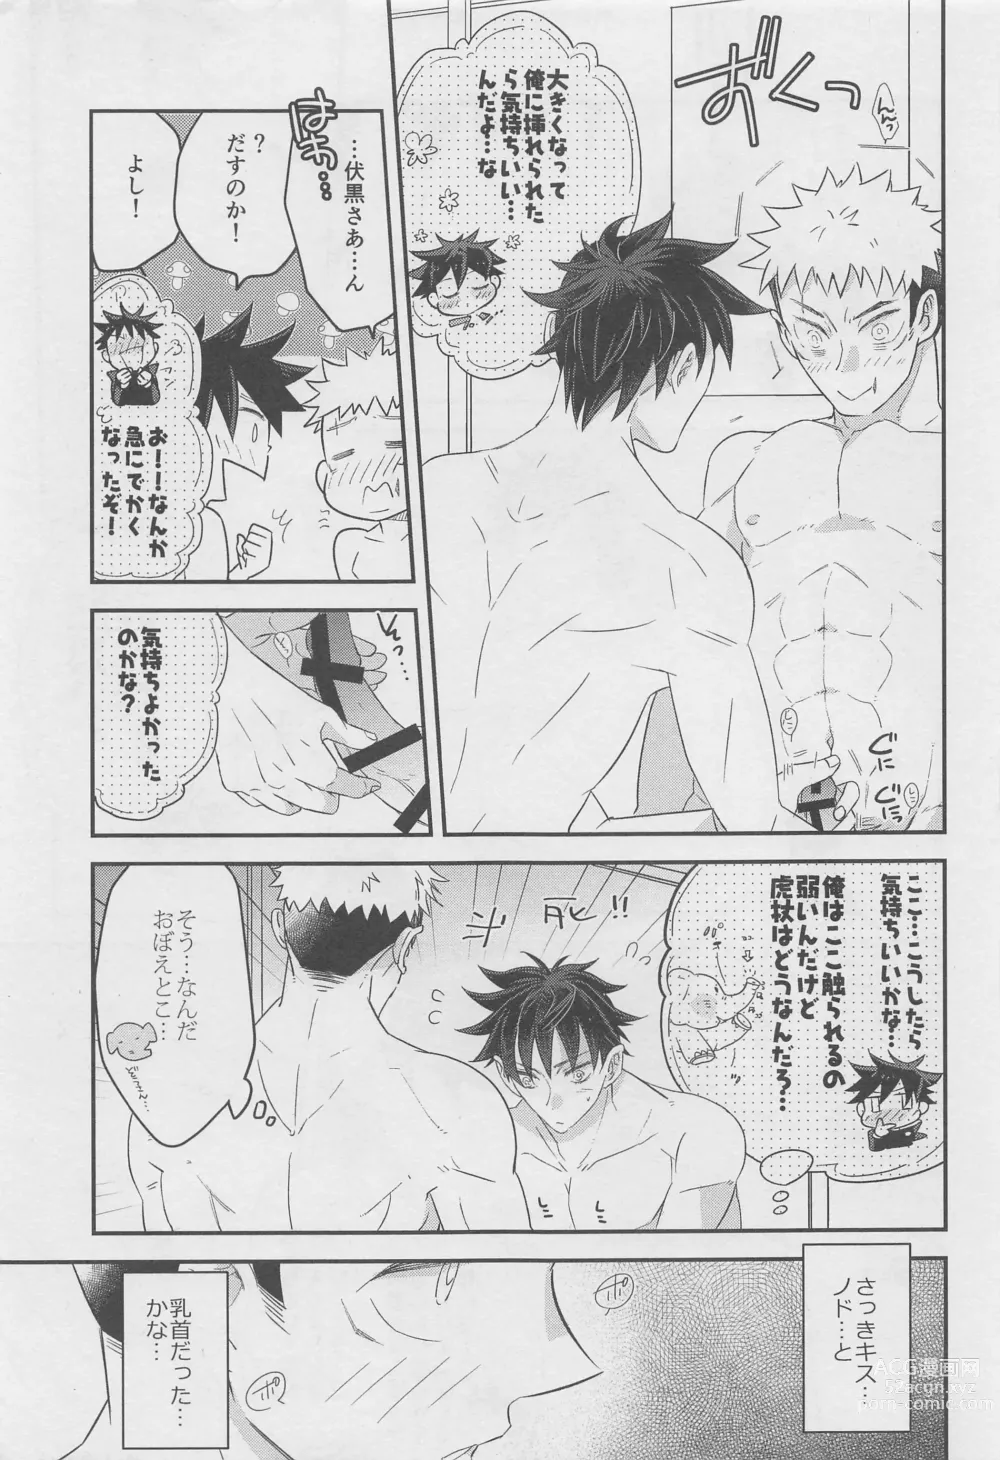 Page 20 of doujinshi Honne  Megane to Kimi to Boku - Will you show me how you really fell about me?